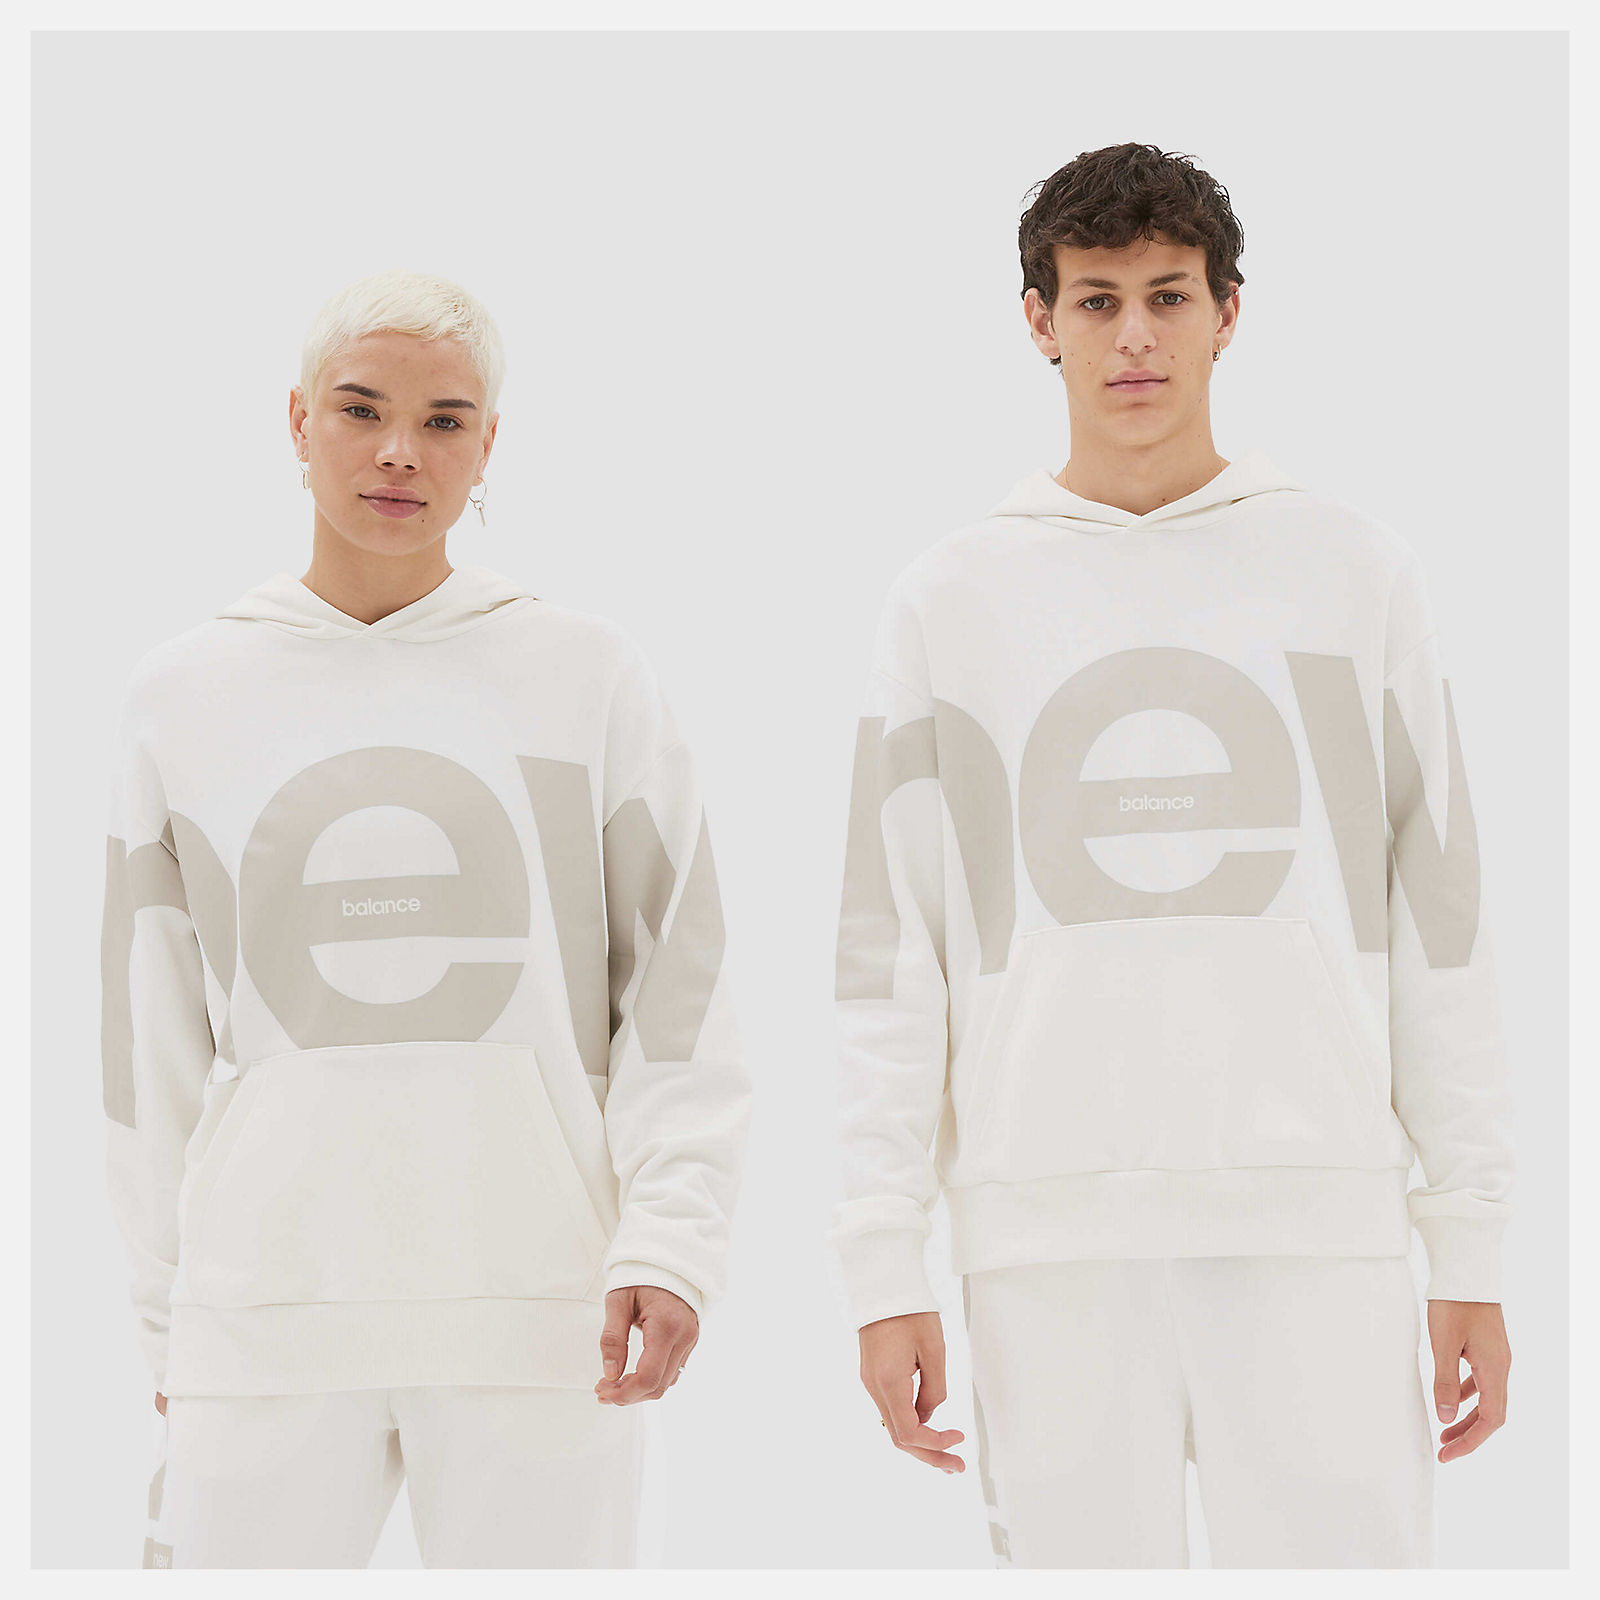 NB Athletics Unisex Out of Bounds Hoodie - New Balance